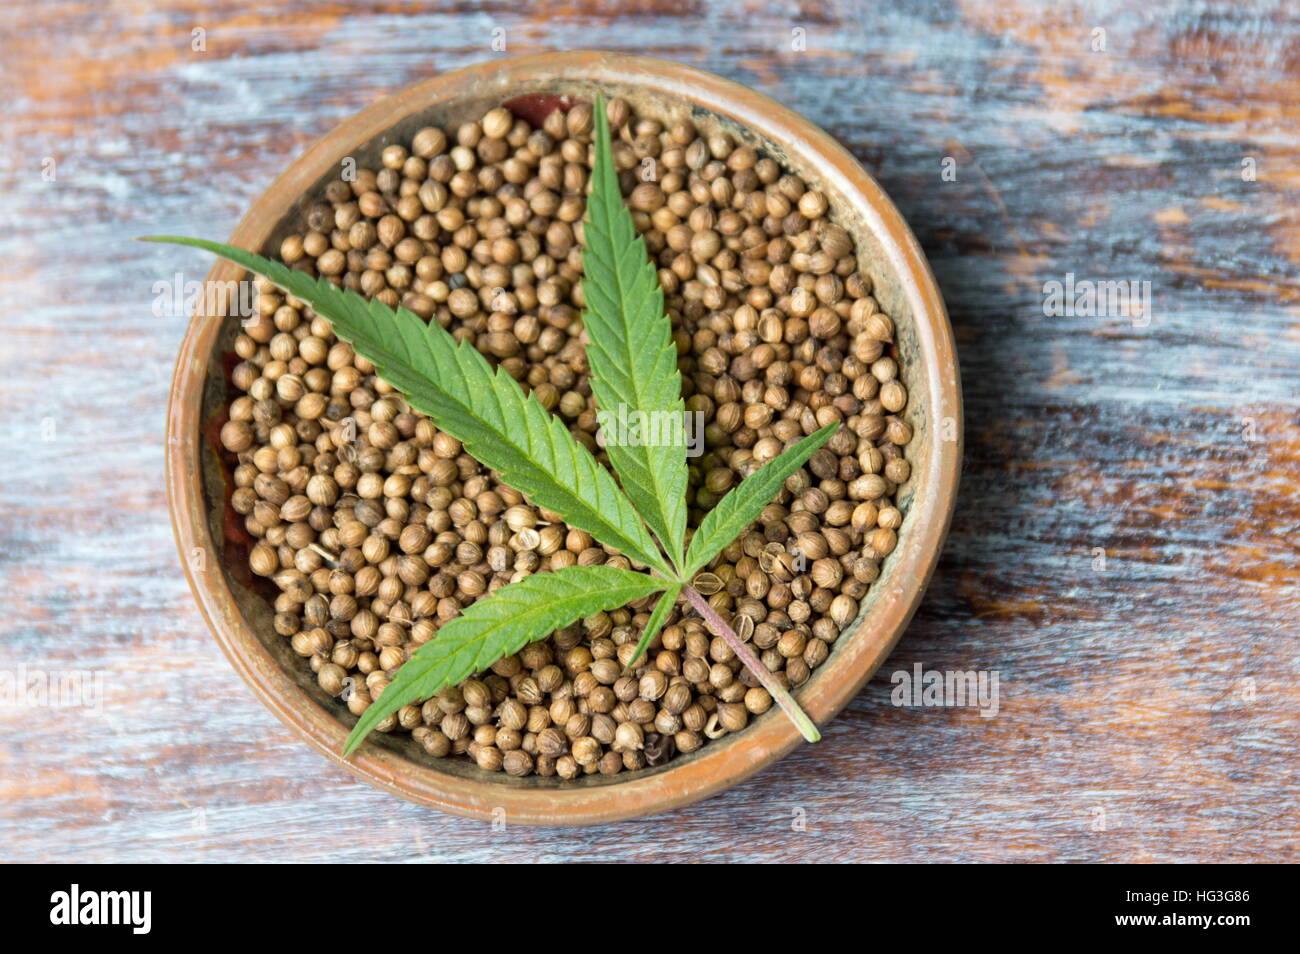 Marijuana plant and Cannabis seeds in a plate Stock Photo